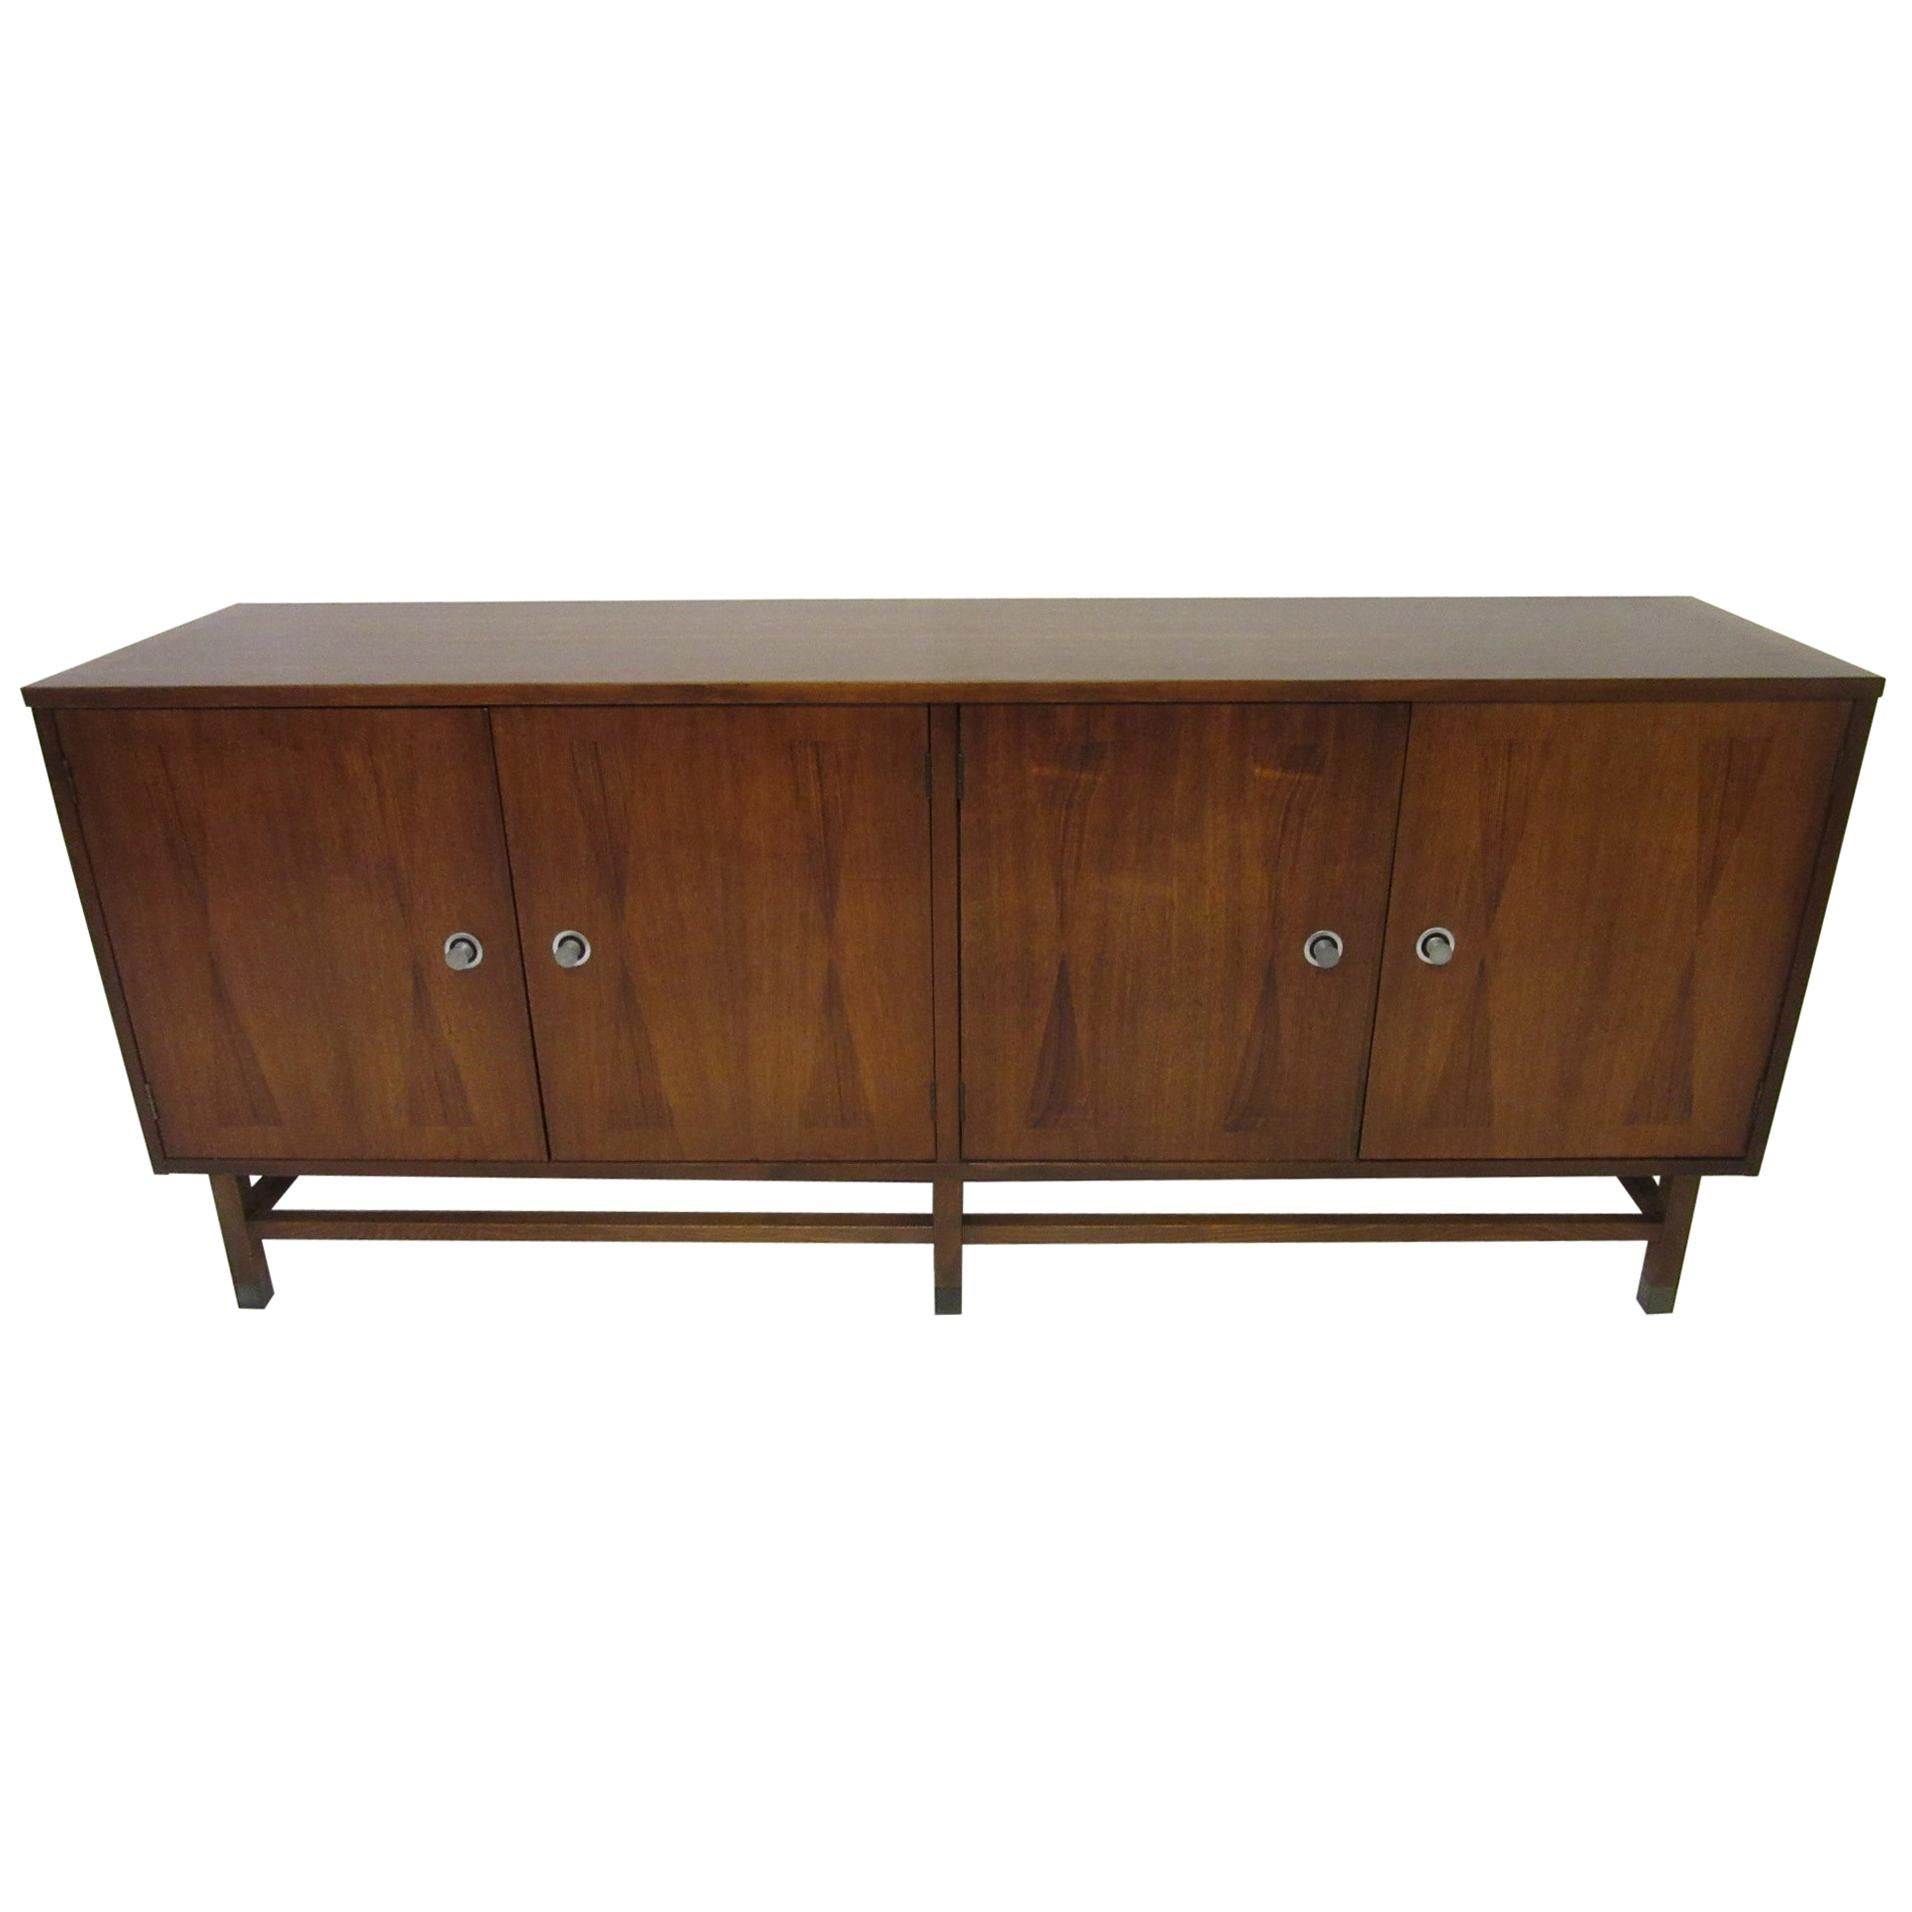 Midcentury Walnut and Rosewood Credenza / Sever Buffet